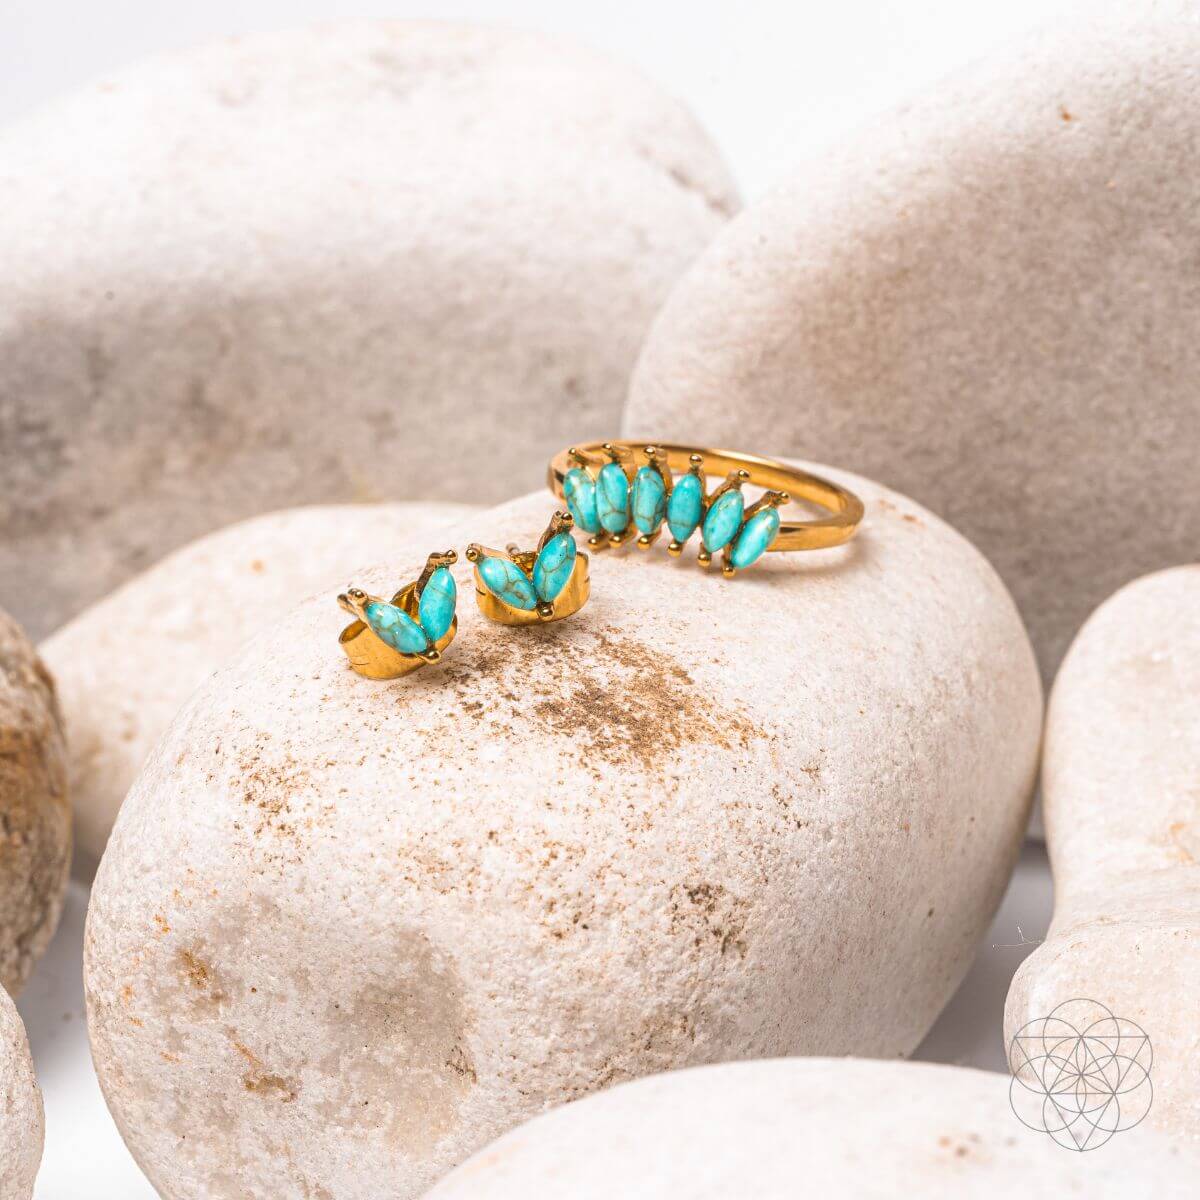 Radiant Shield - Turquoise Earrings and Ring Protection Set